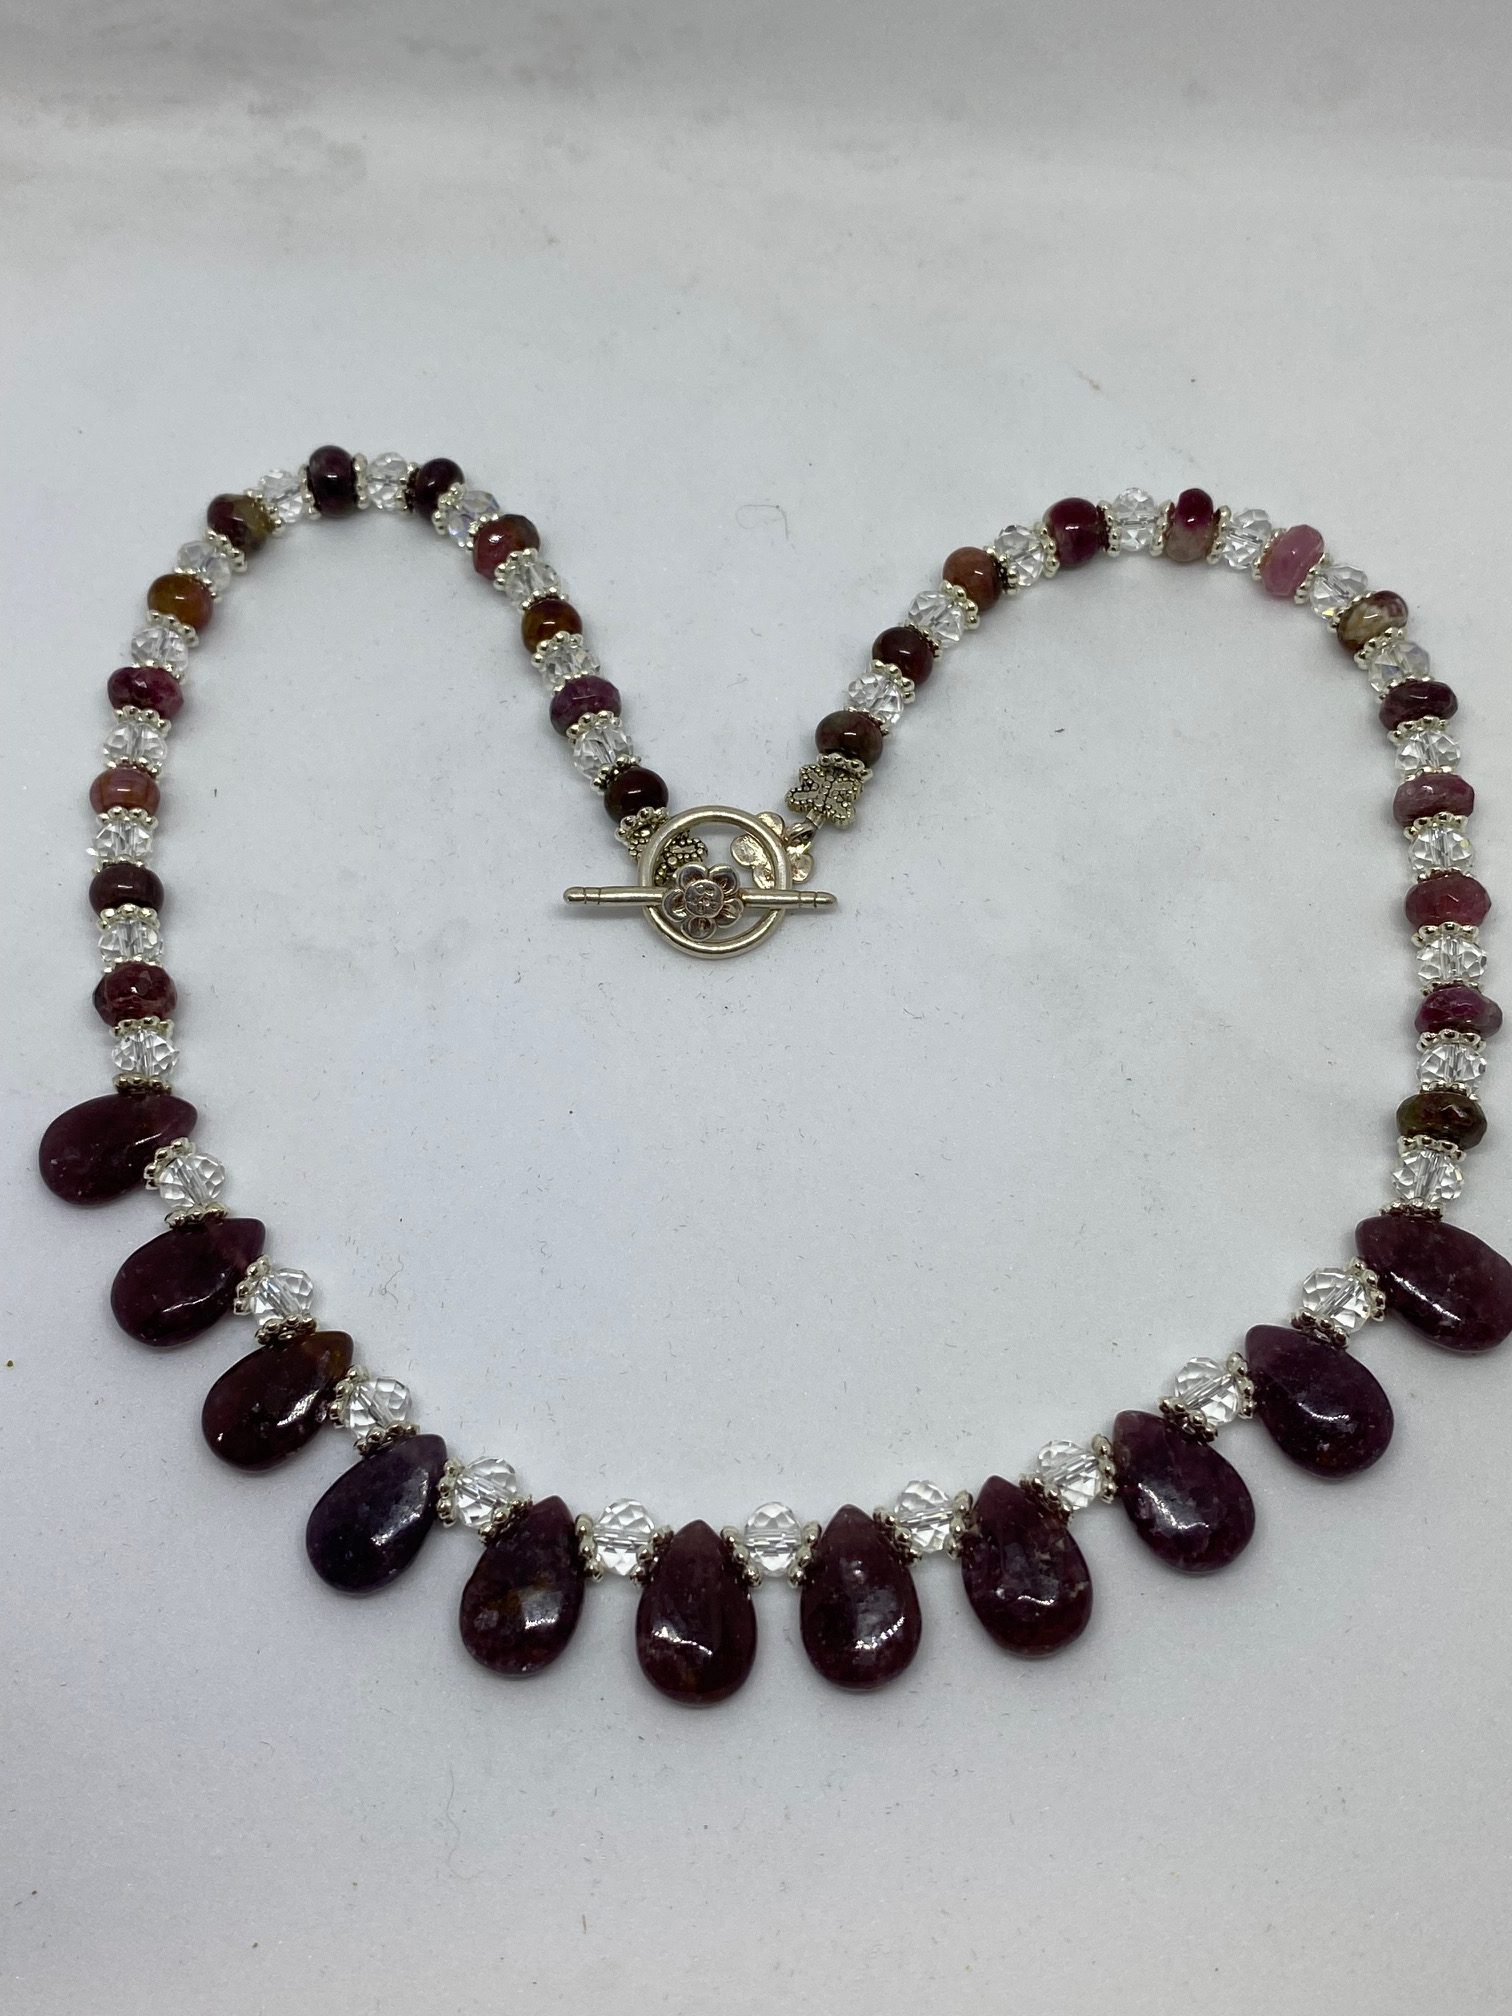 Lepidolite, Swarovski Crystal, and Pink Tourmaline Necklace This necklace supports Serenity, Prosperity, and Heart-Opening.